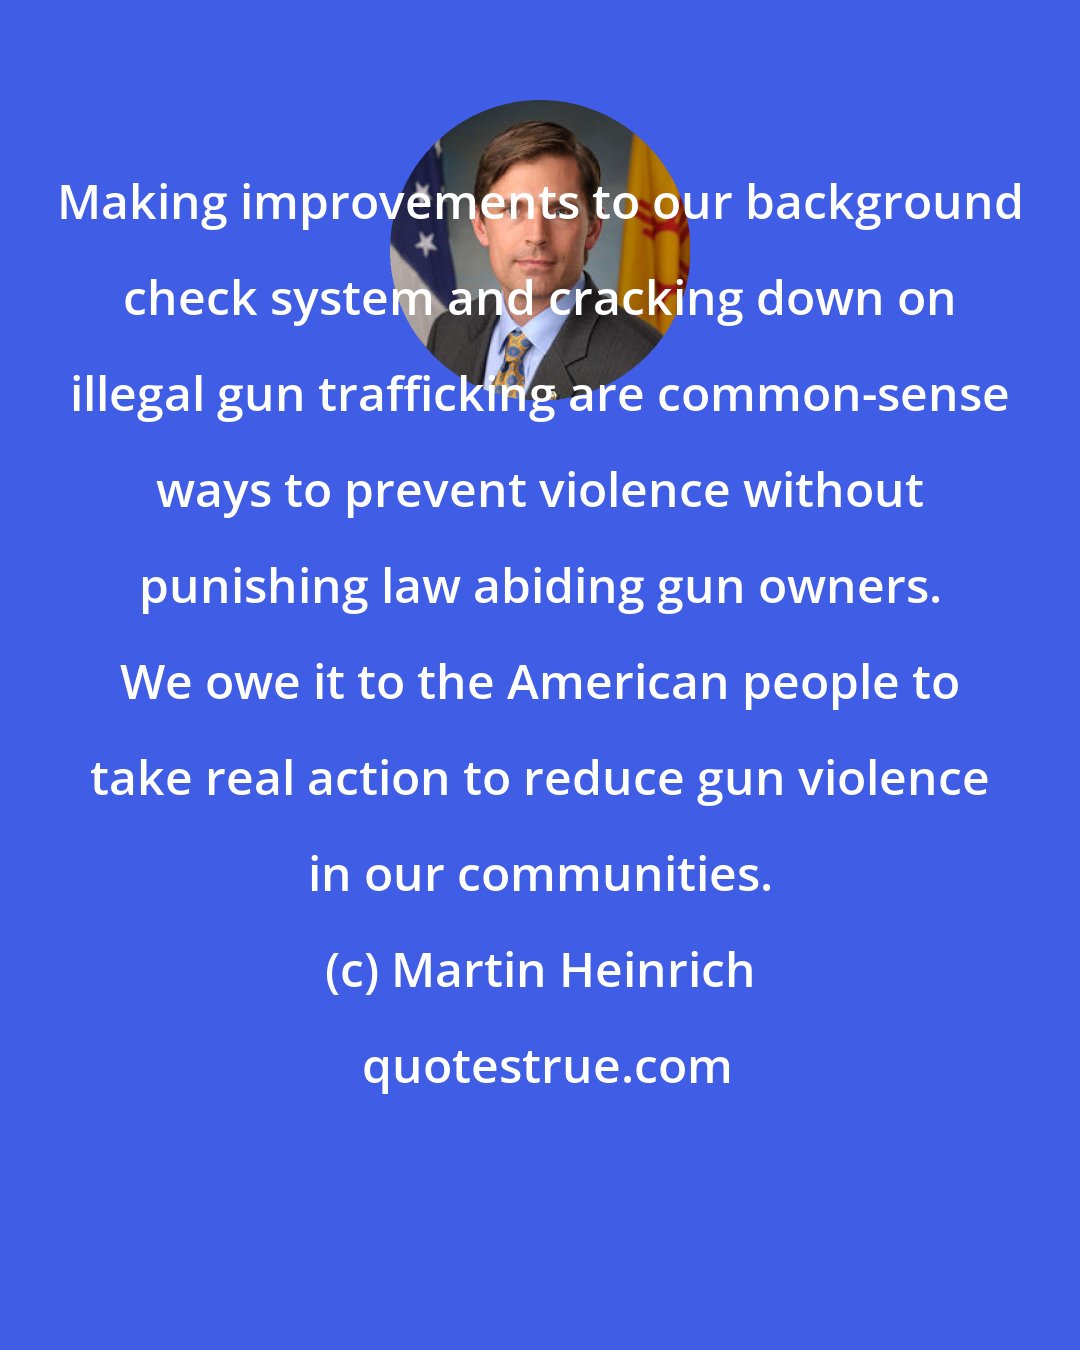 Martin Heinrich: Making improvements to our background check system and cracking down on illegal gun trafficking are common-sense ways to prevent violence without punishing law abiding gun owners. We owe it to the American people to take real action to reduce gun violence in our communities.